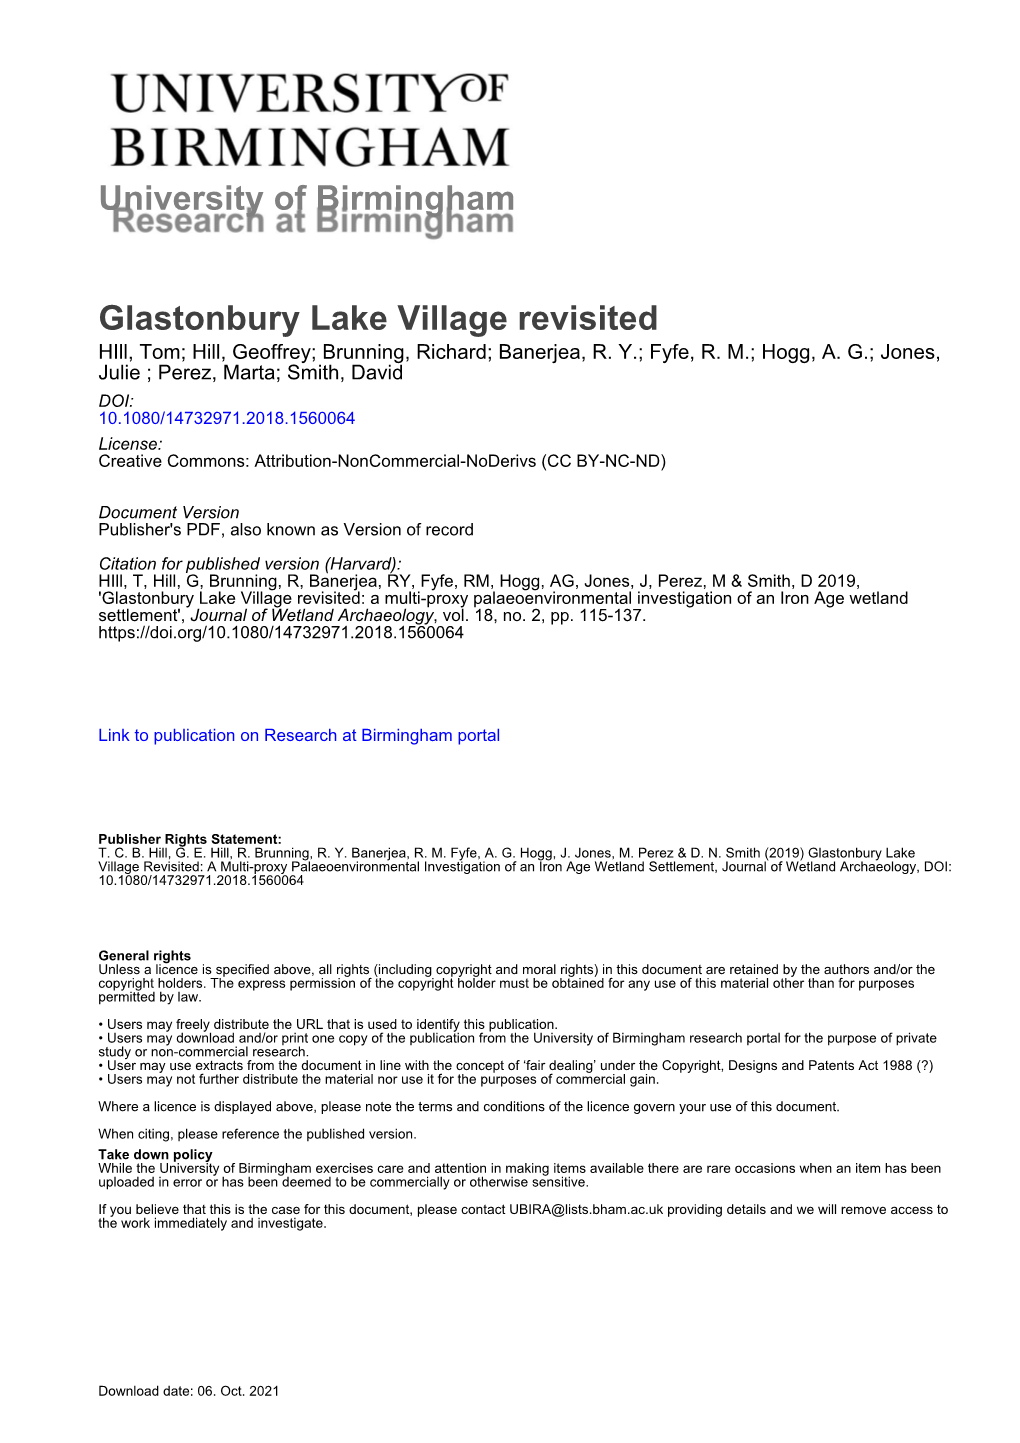 Glastonbury Lake Village Revisited: a Multi-Proxy Palaeoenvironmental Investigation of an Iron Age Wetland Settlement', Journal of Wetland Archaeology, Vol